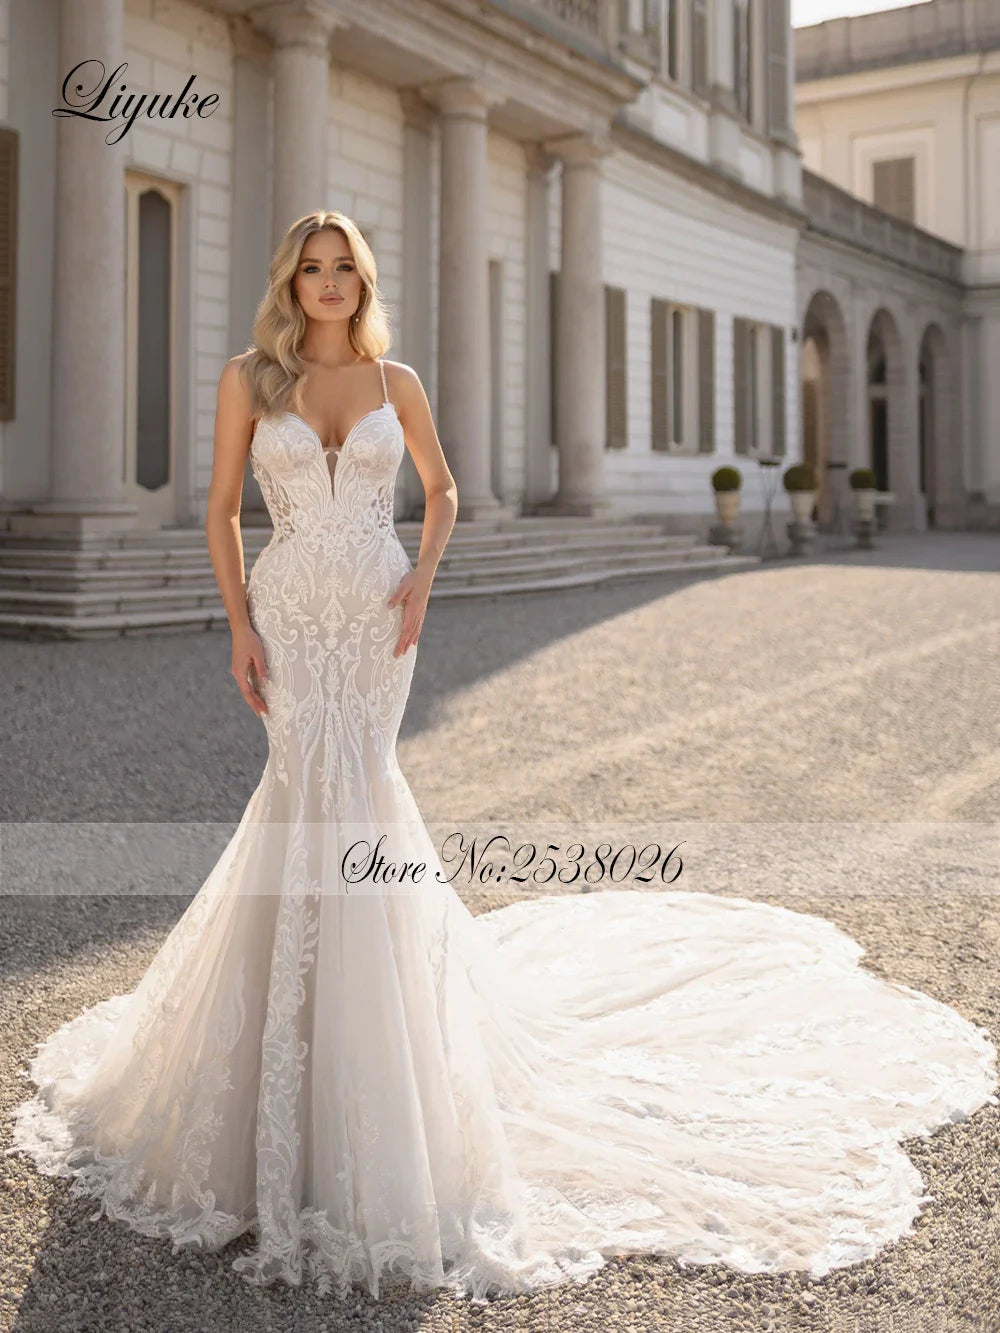 Stunning Sweetheart Mermaid Wedding Dresses Impressing Beaded Pearls aghetti Straps Appliques Lace Bridal Gowns